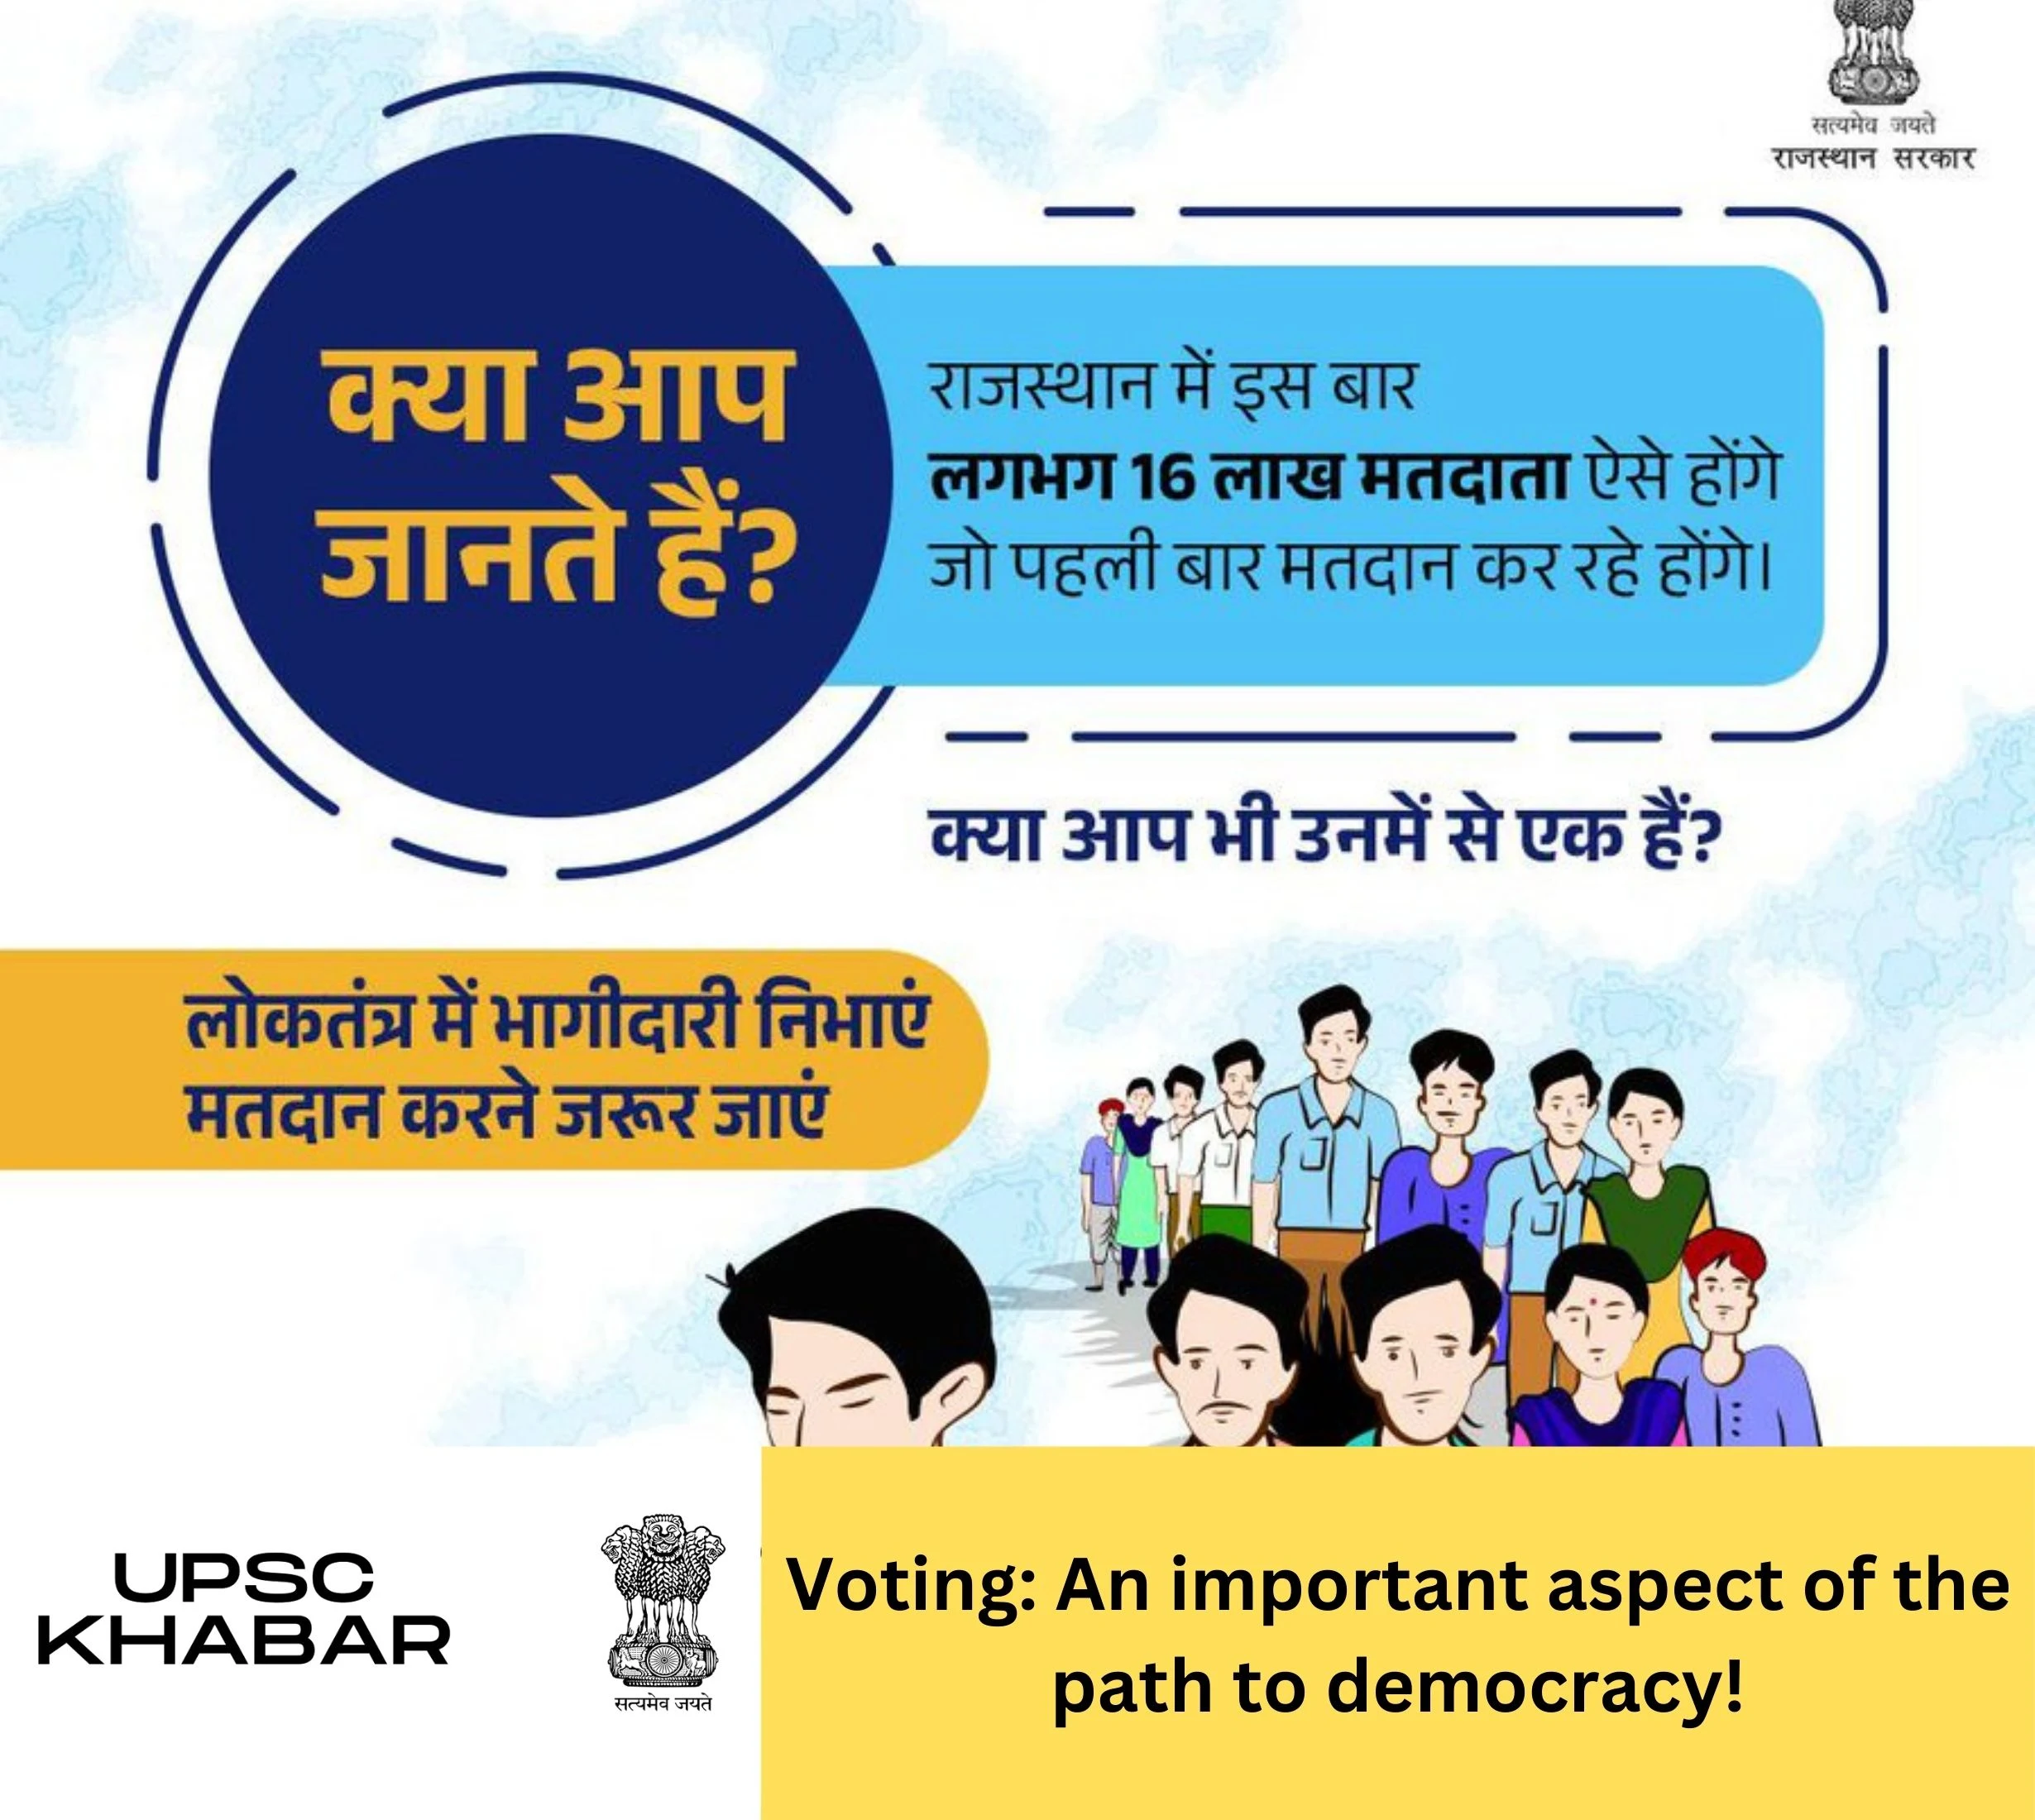 Voting: An important aspect of the path to democracy!